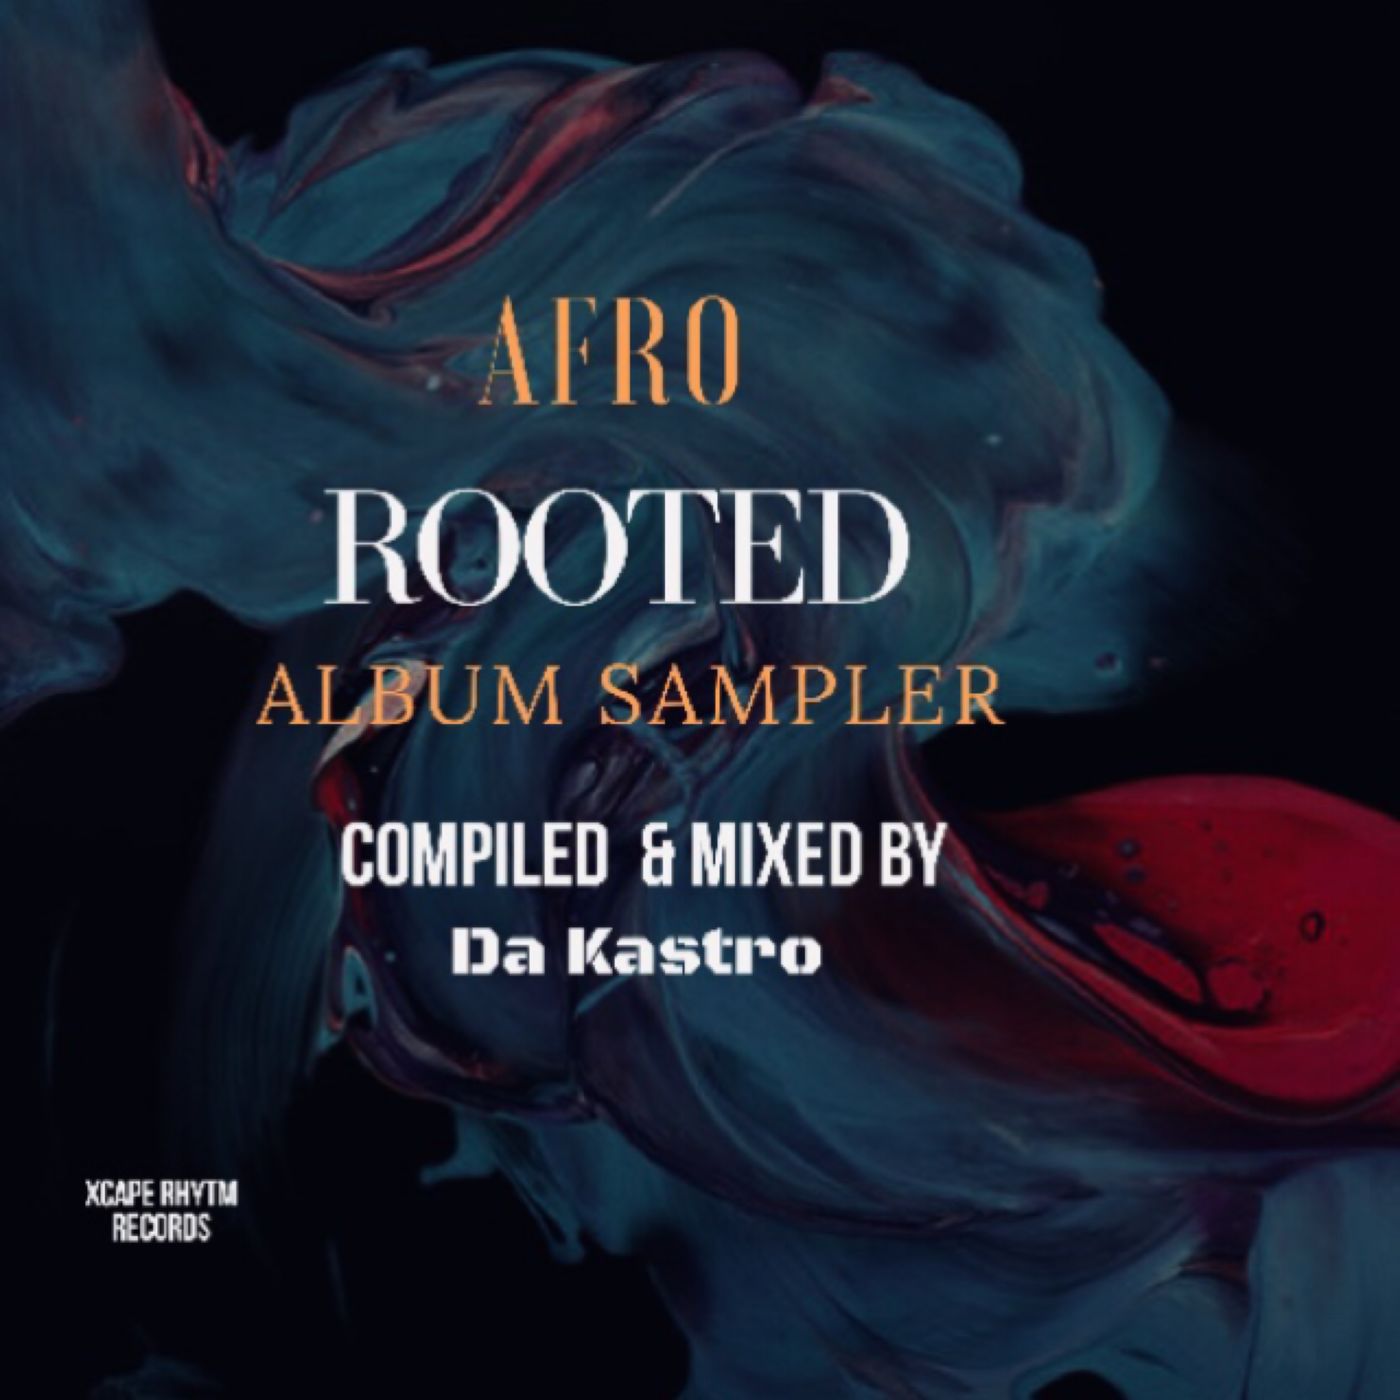 VA - Afro Rooted (Compiled & Mixed By Da Kastro )Album Sampler / Xcape Rhythm Records